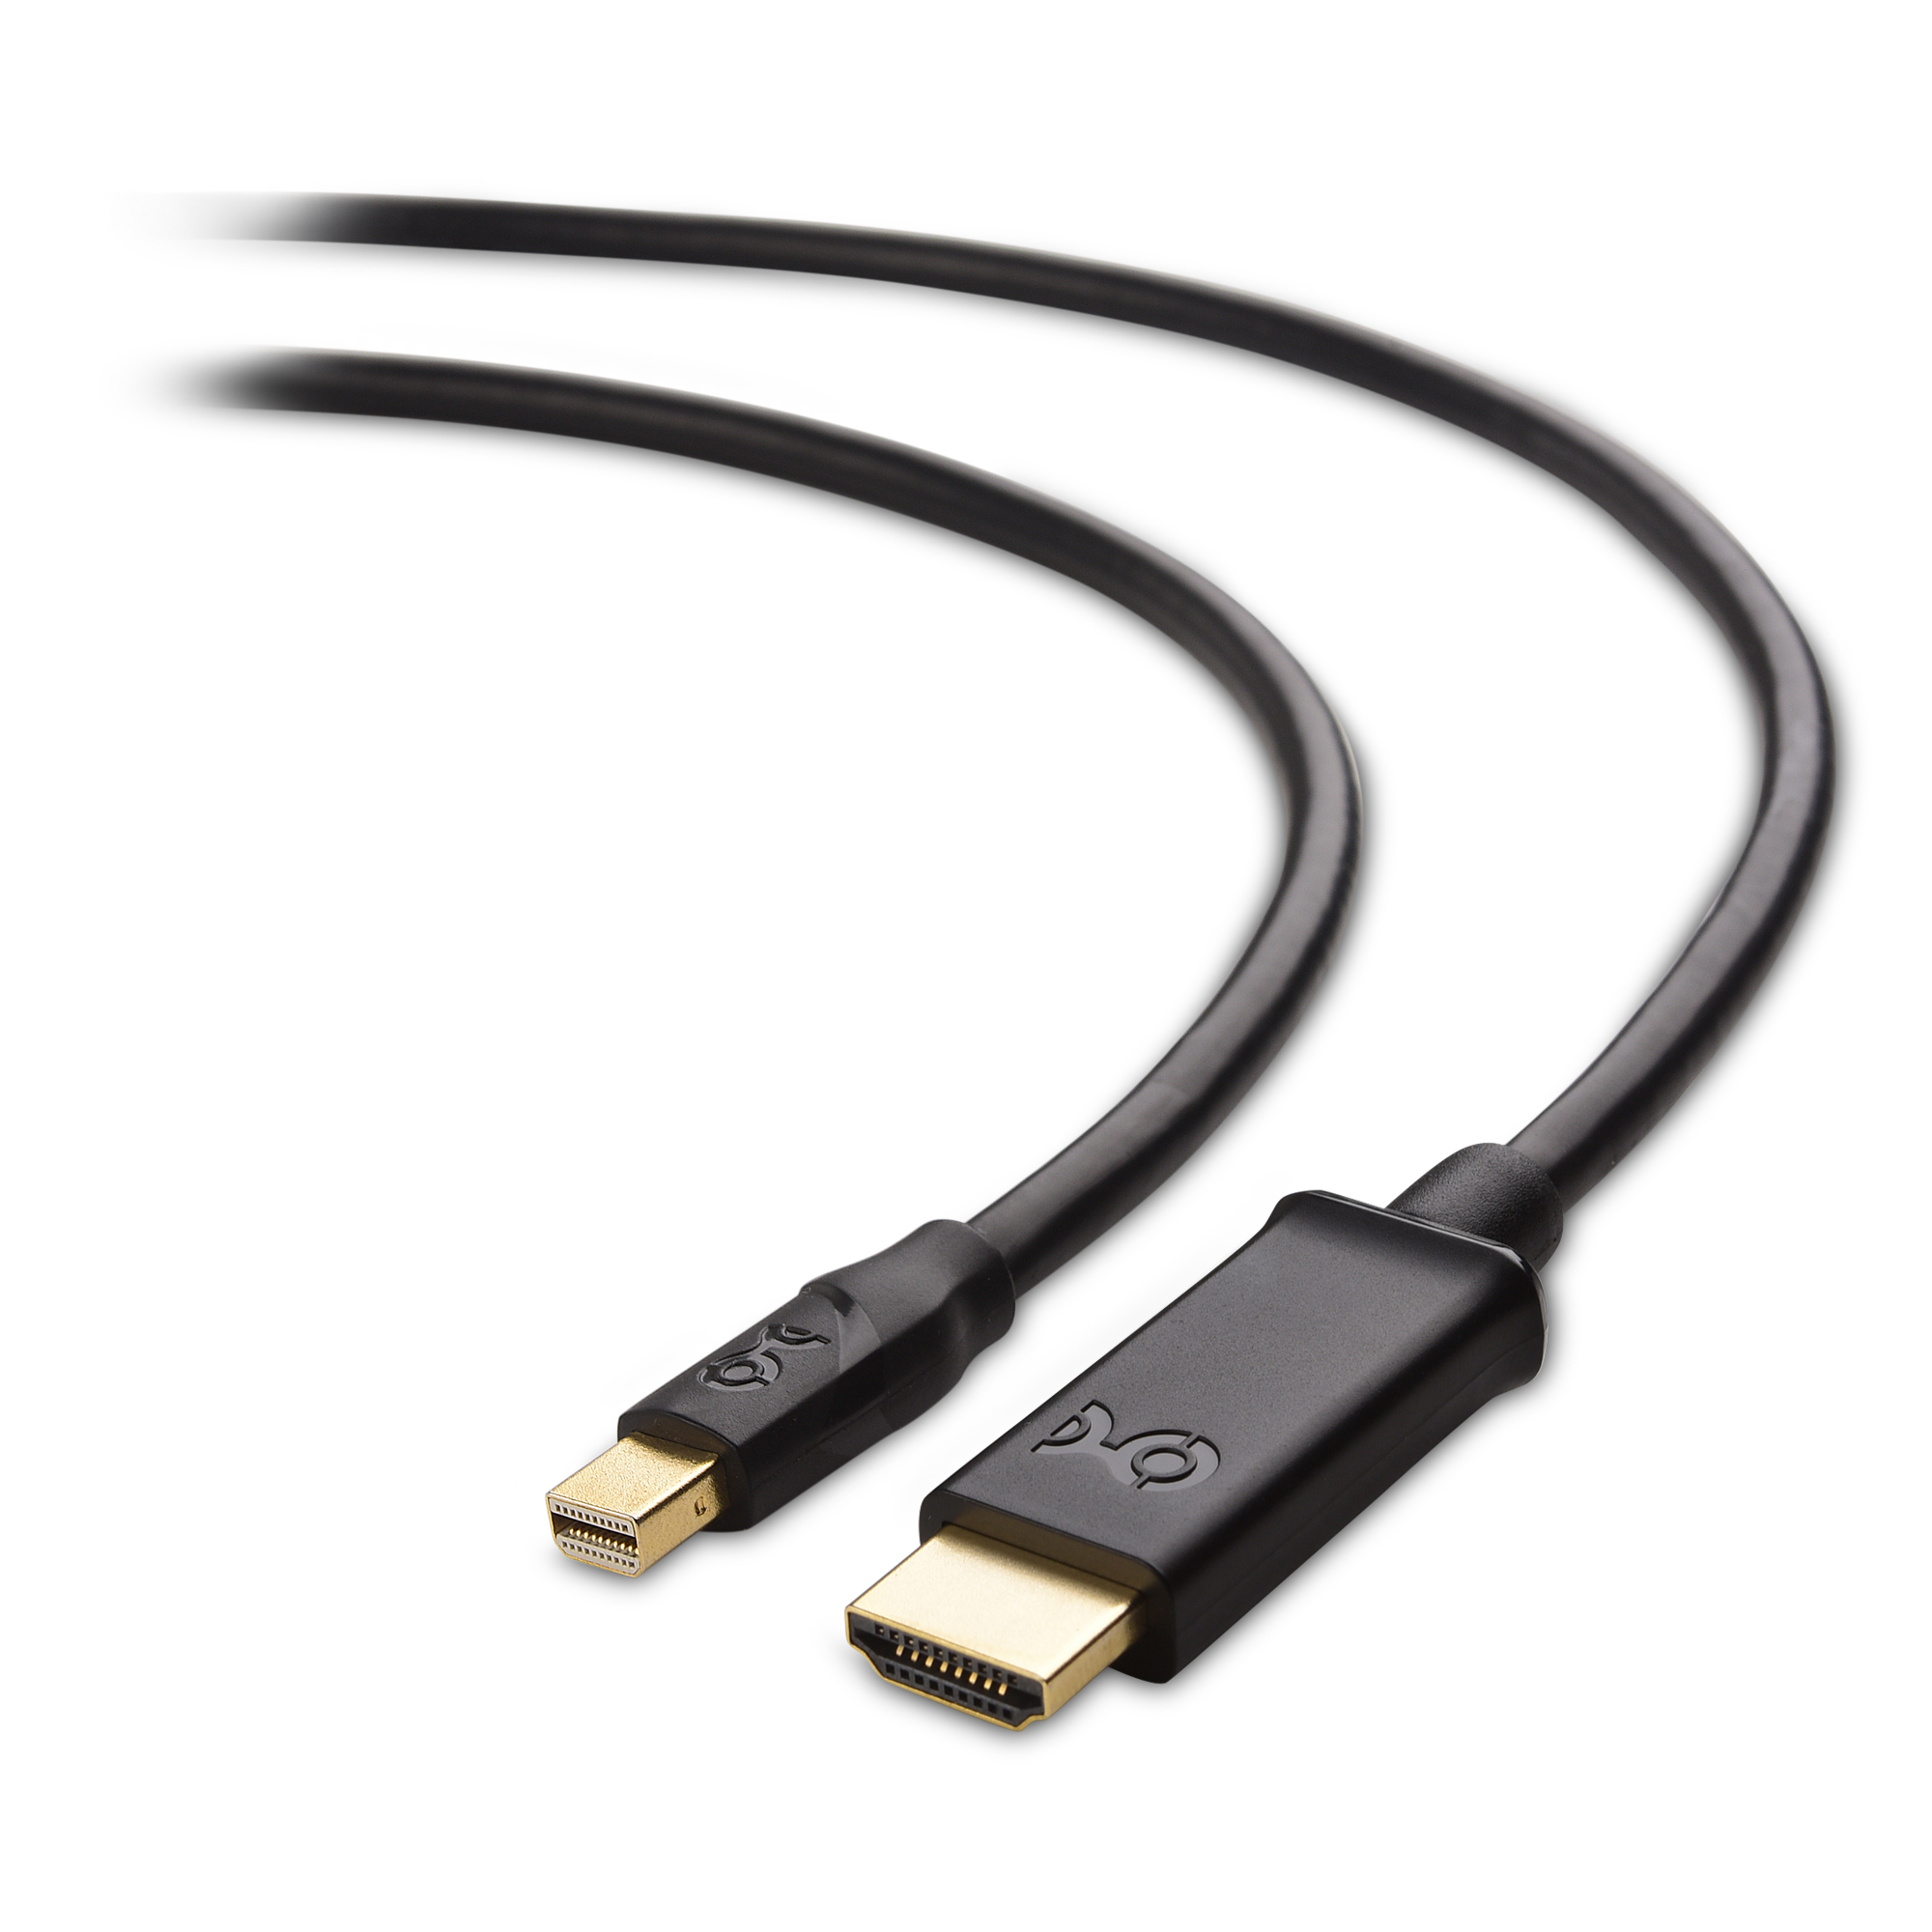 macbook pro cable for tv